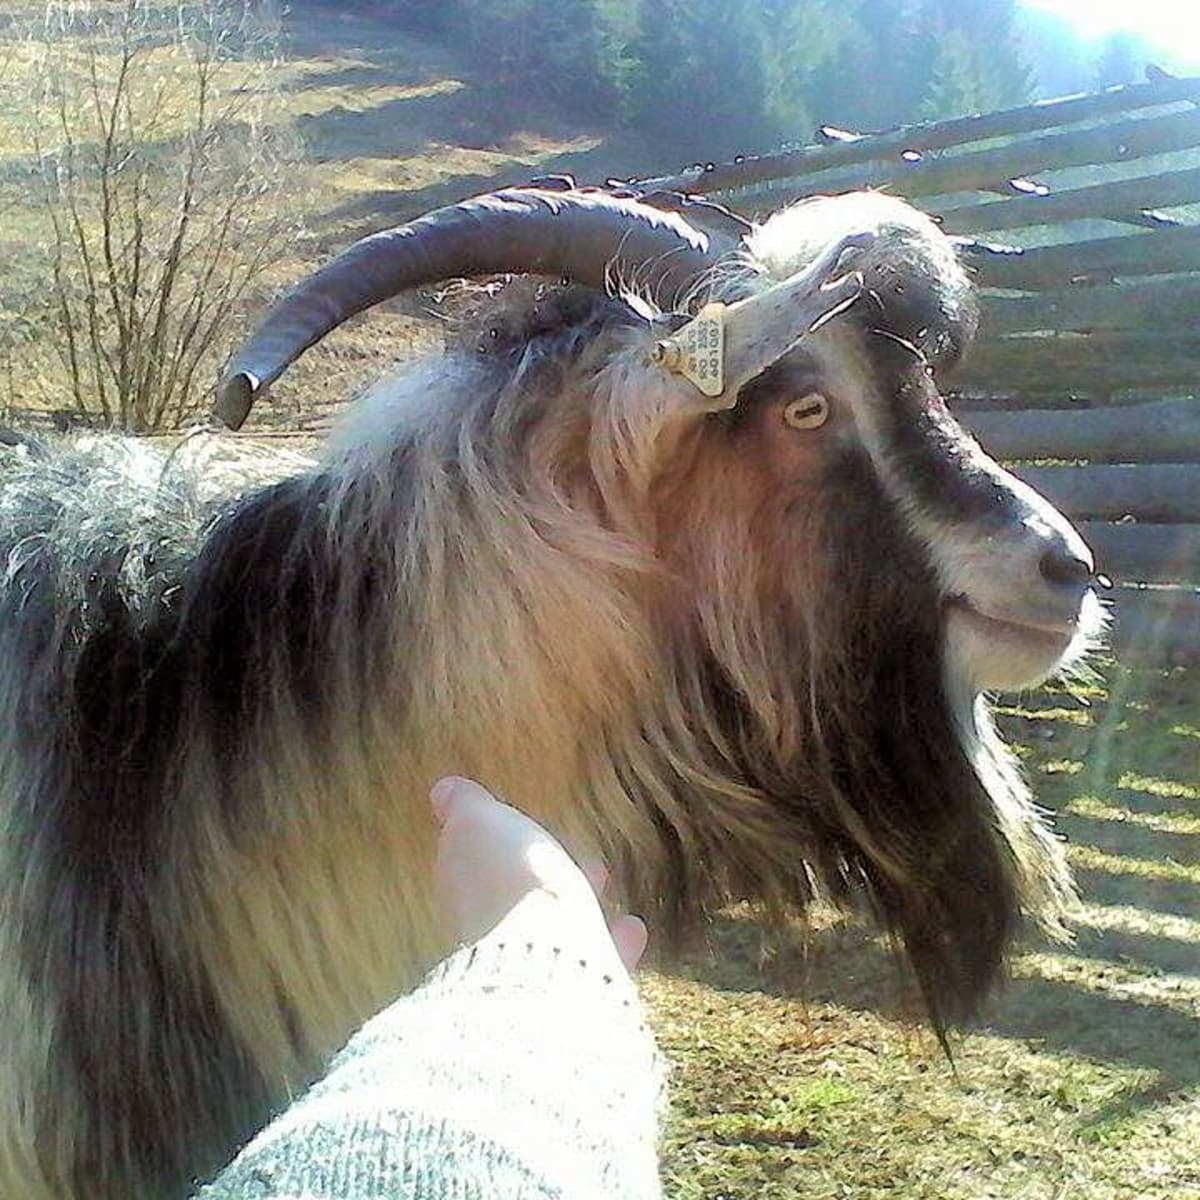 Goats Are Farm Animals That Make Great Pets! - PetHelpful